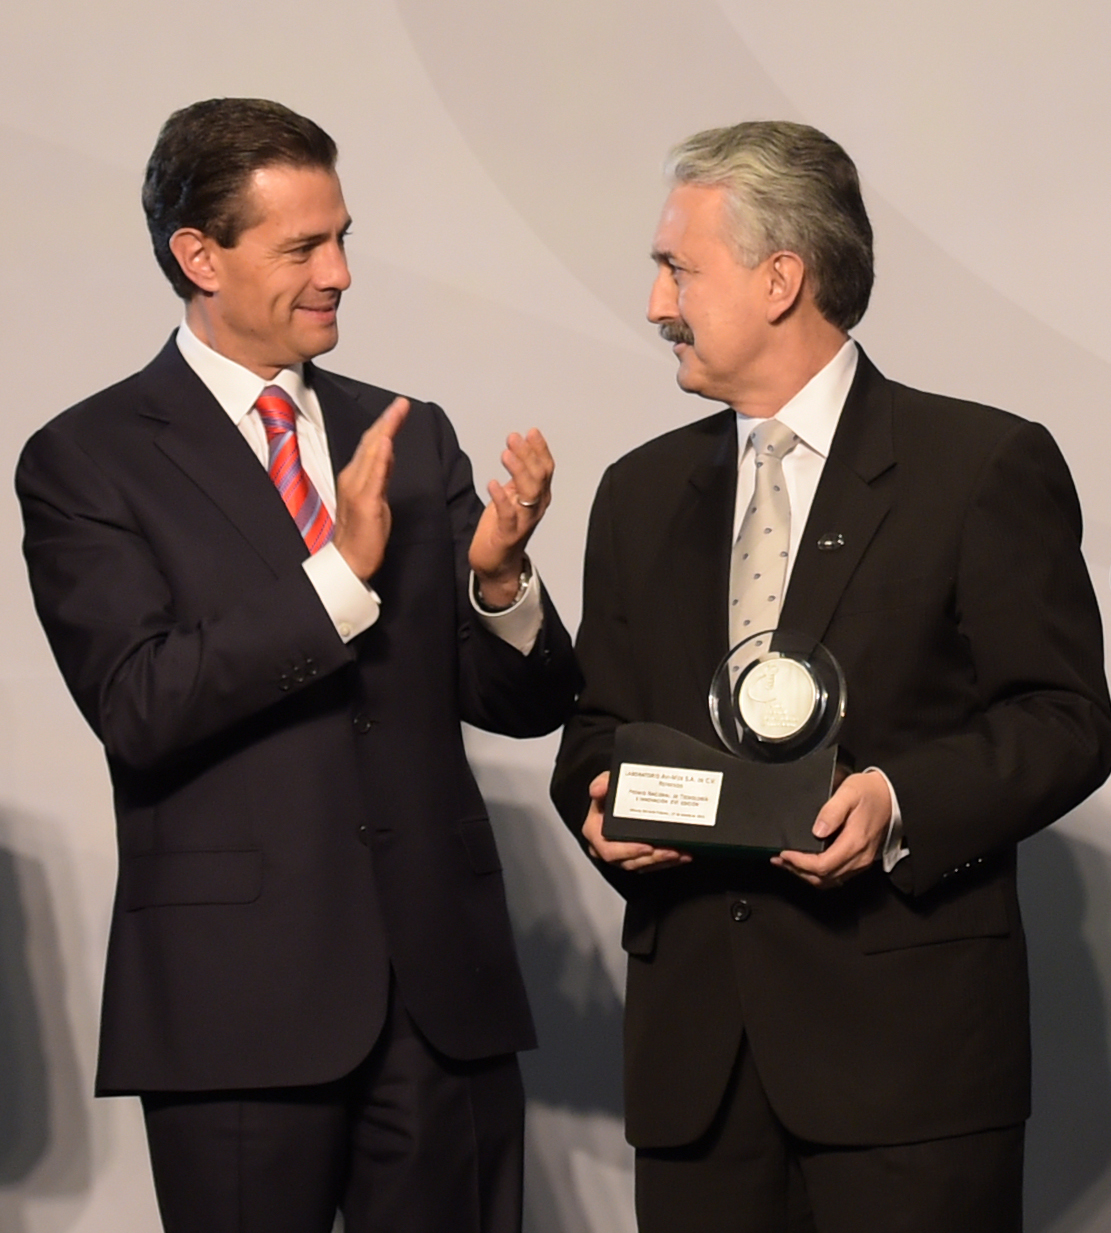 two men in suits are applauding and holding a award